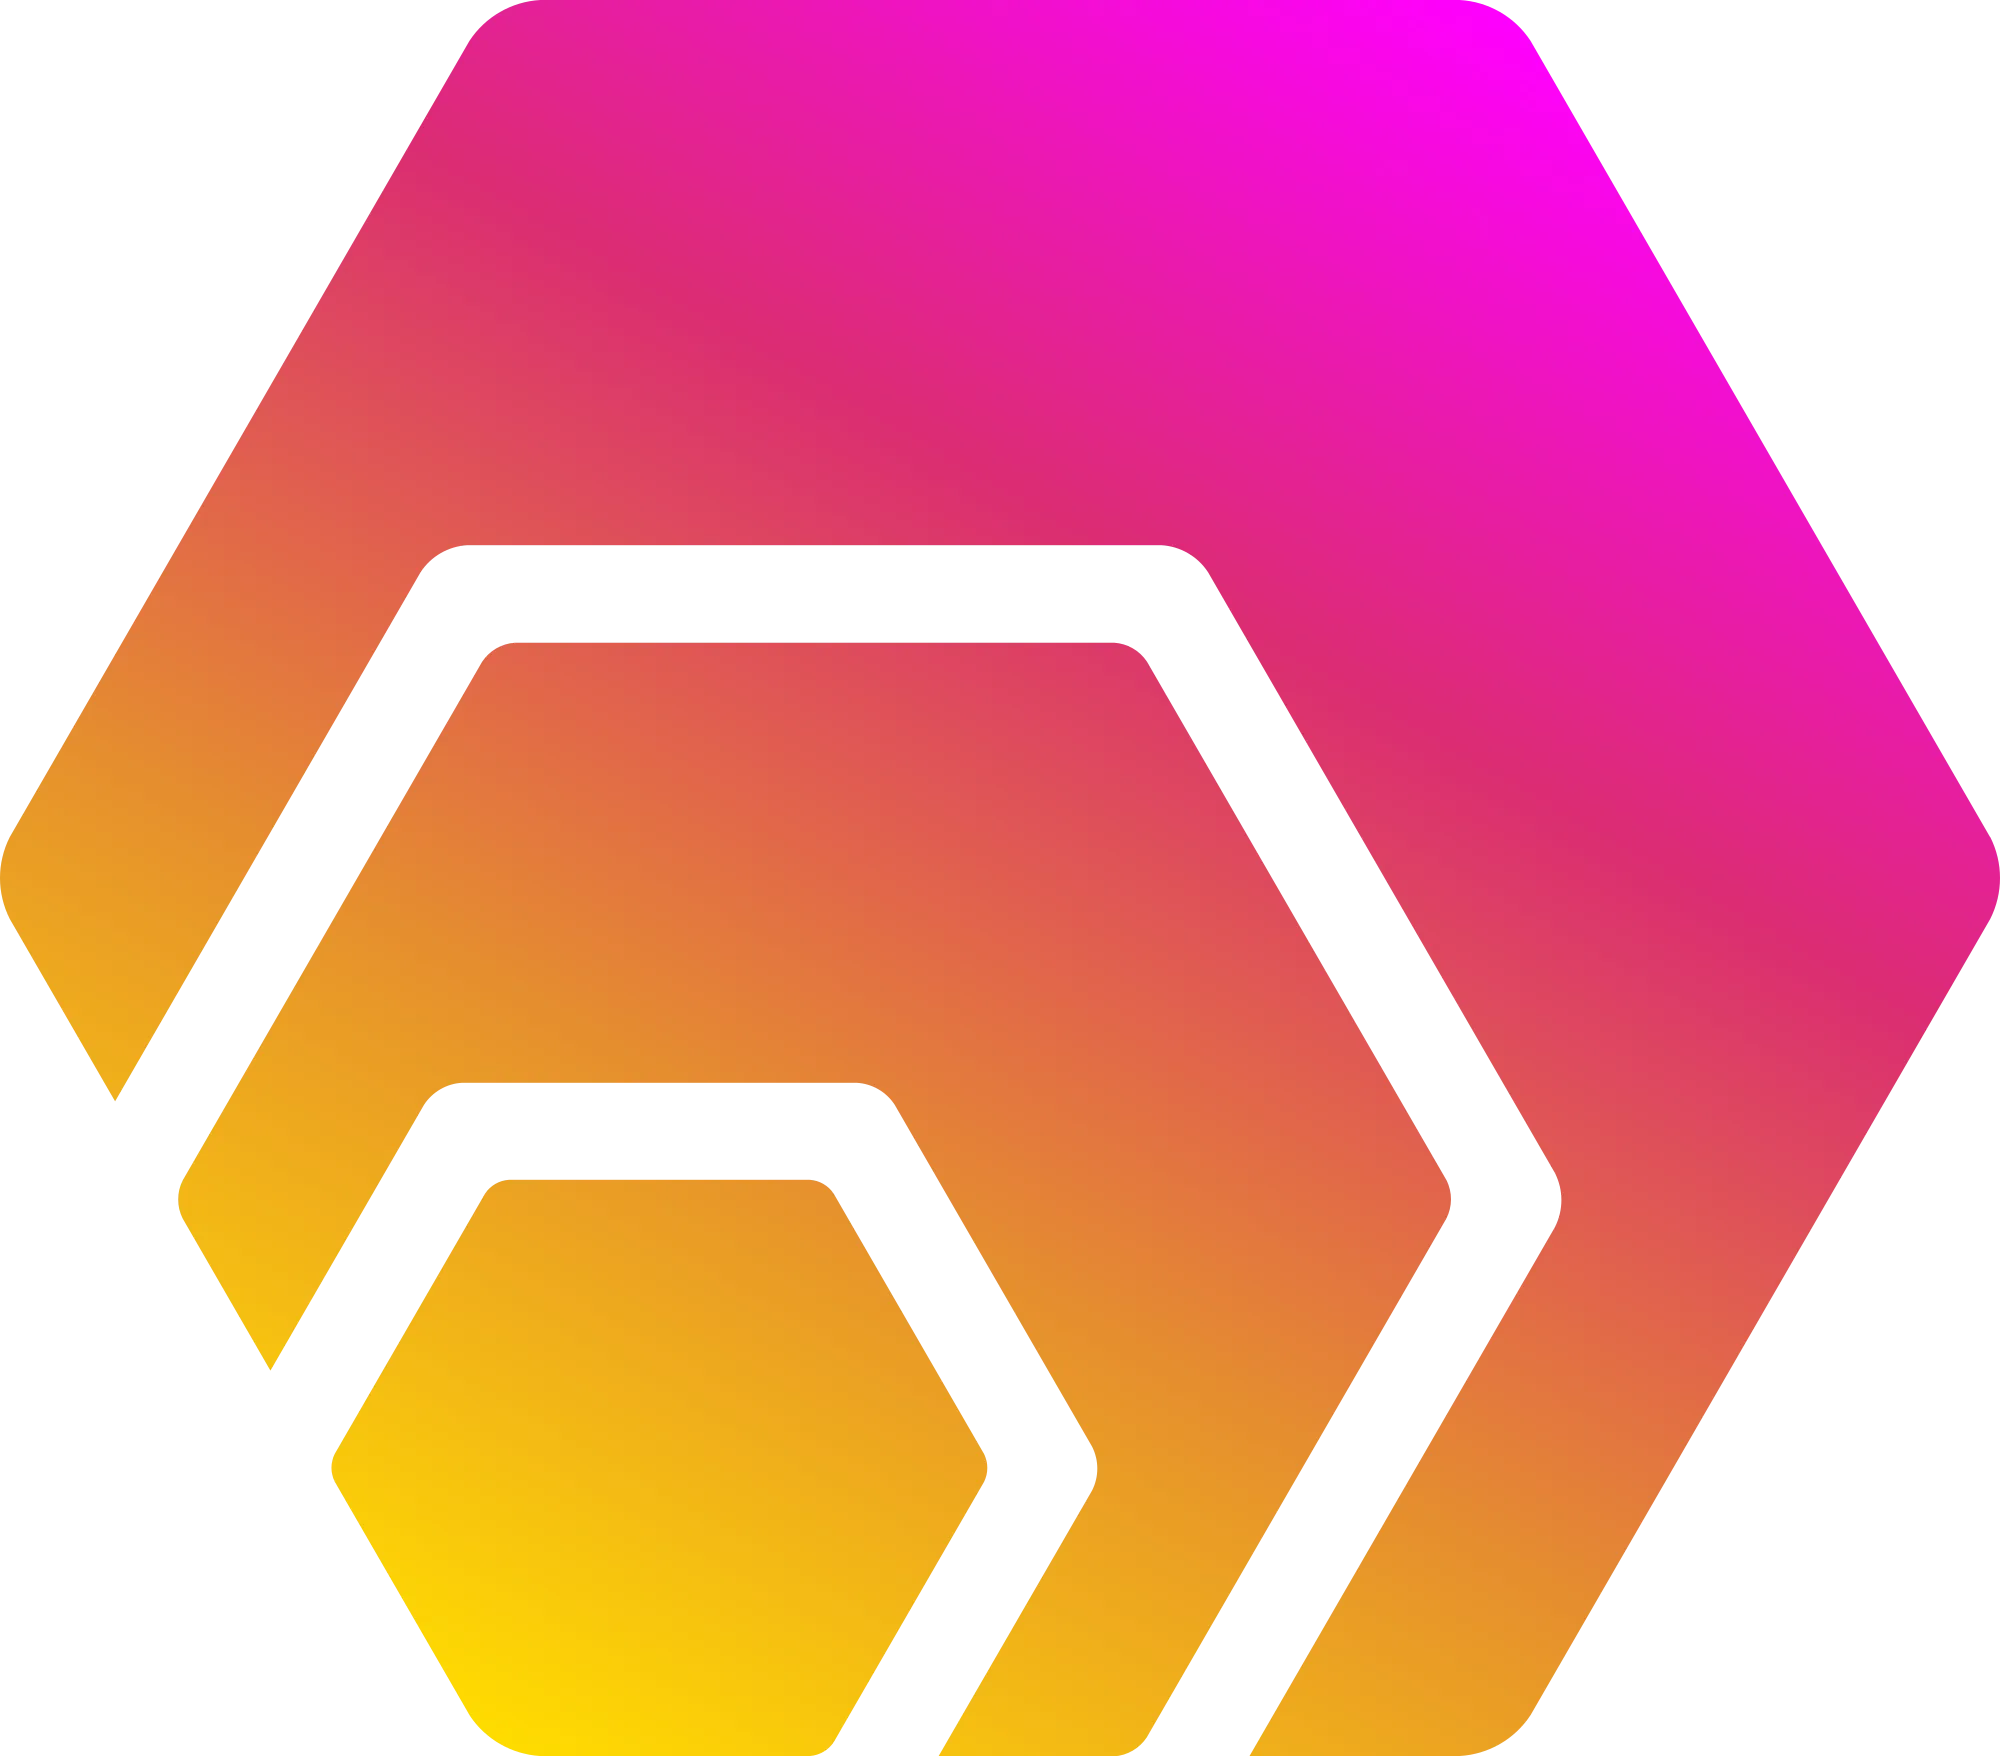 HEX logo in png format